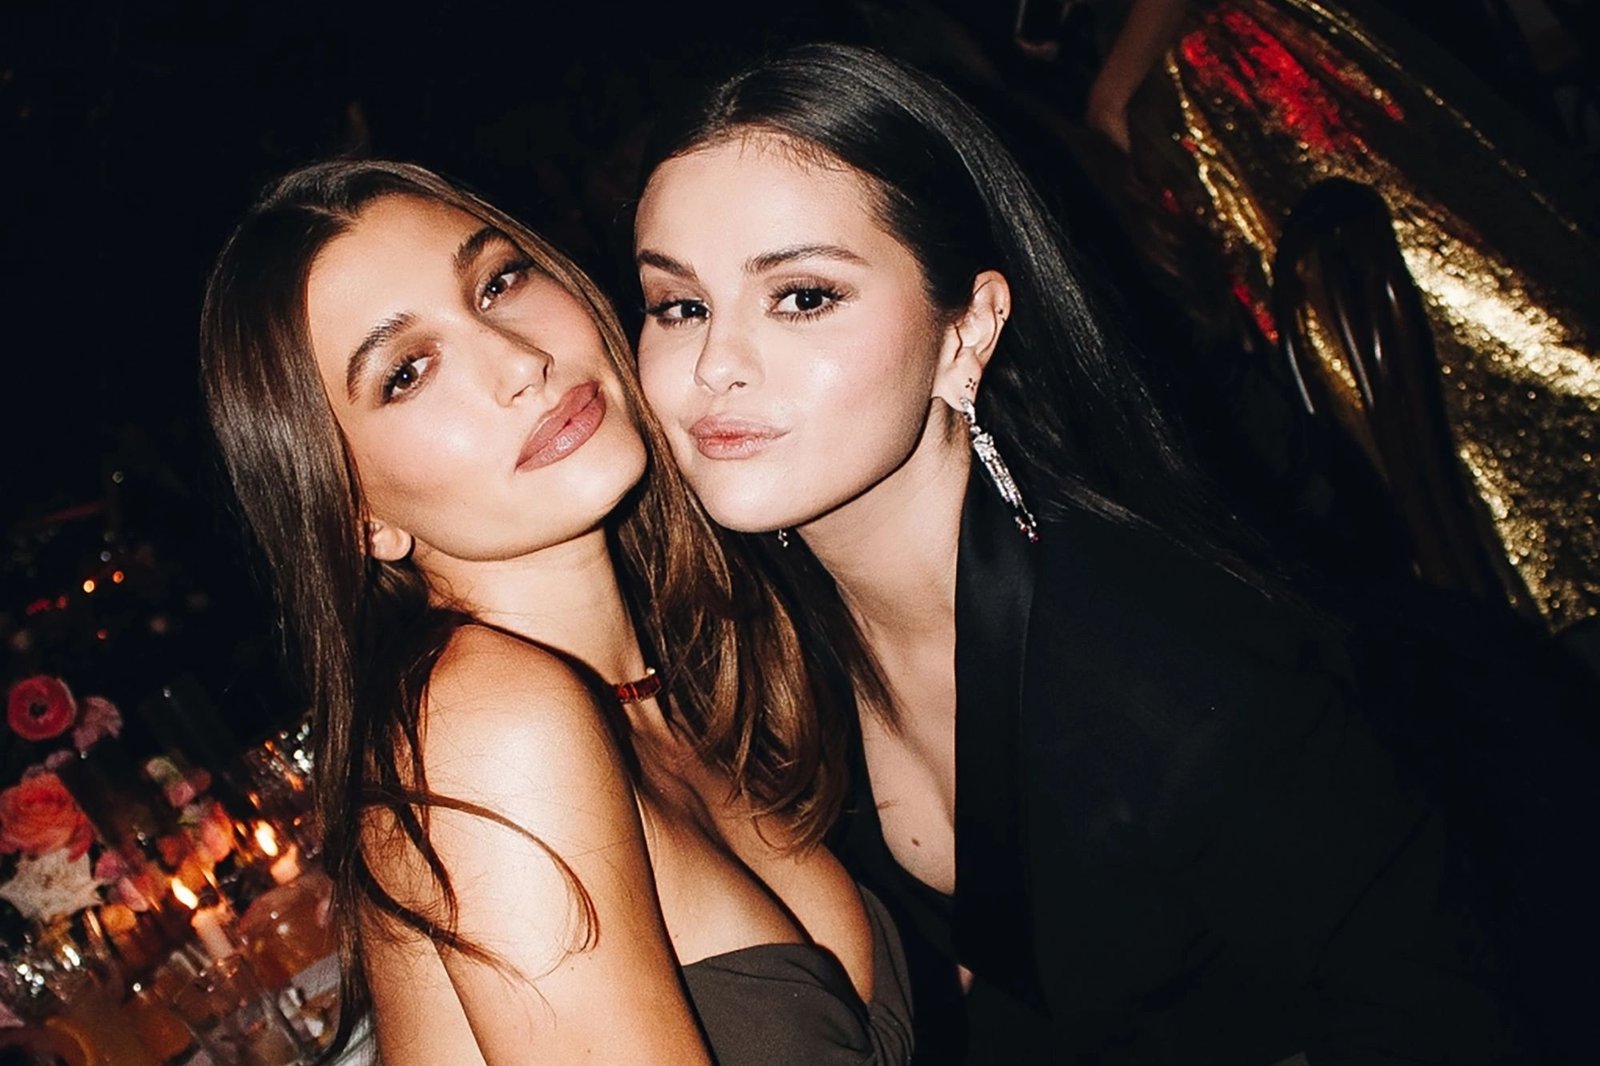 Selena Gomez Responds When Asked About the Viral Pictures of Her and Hailey Bieber During the Event